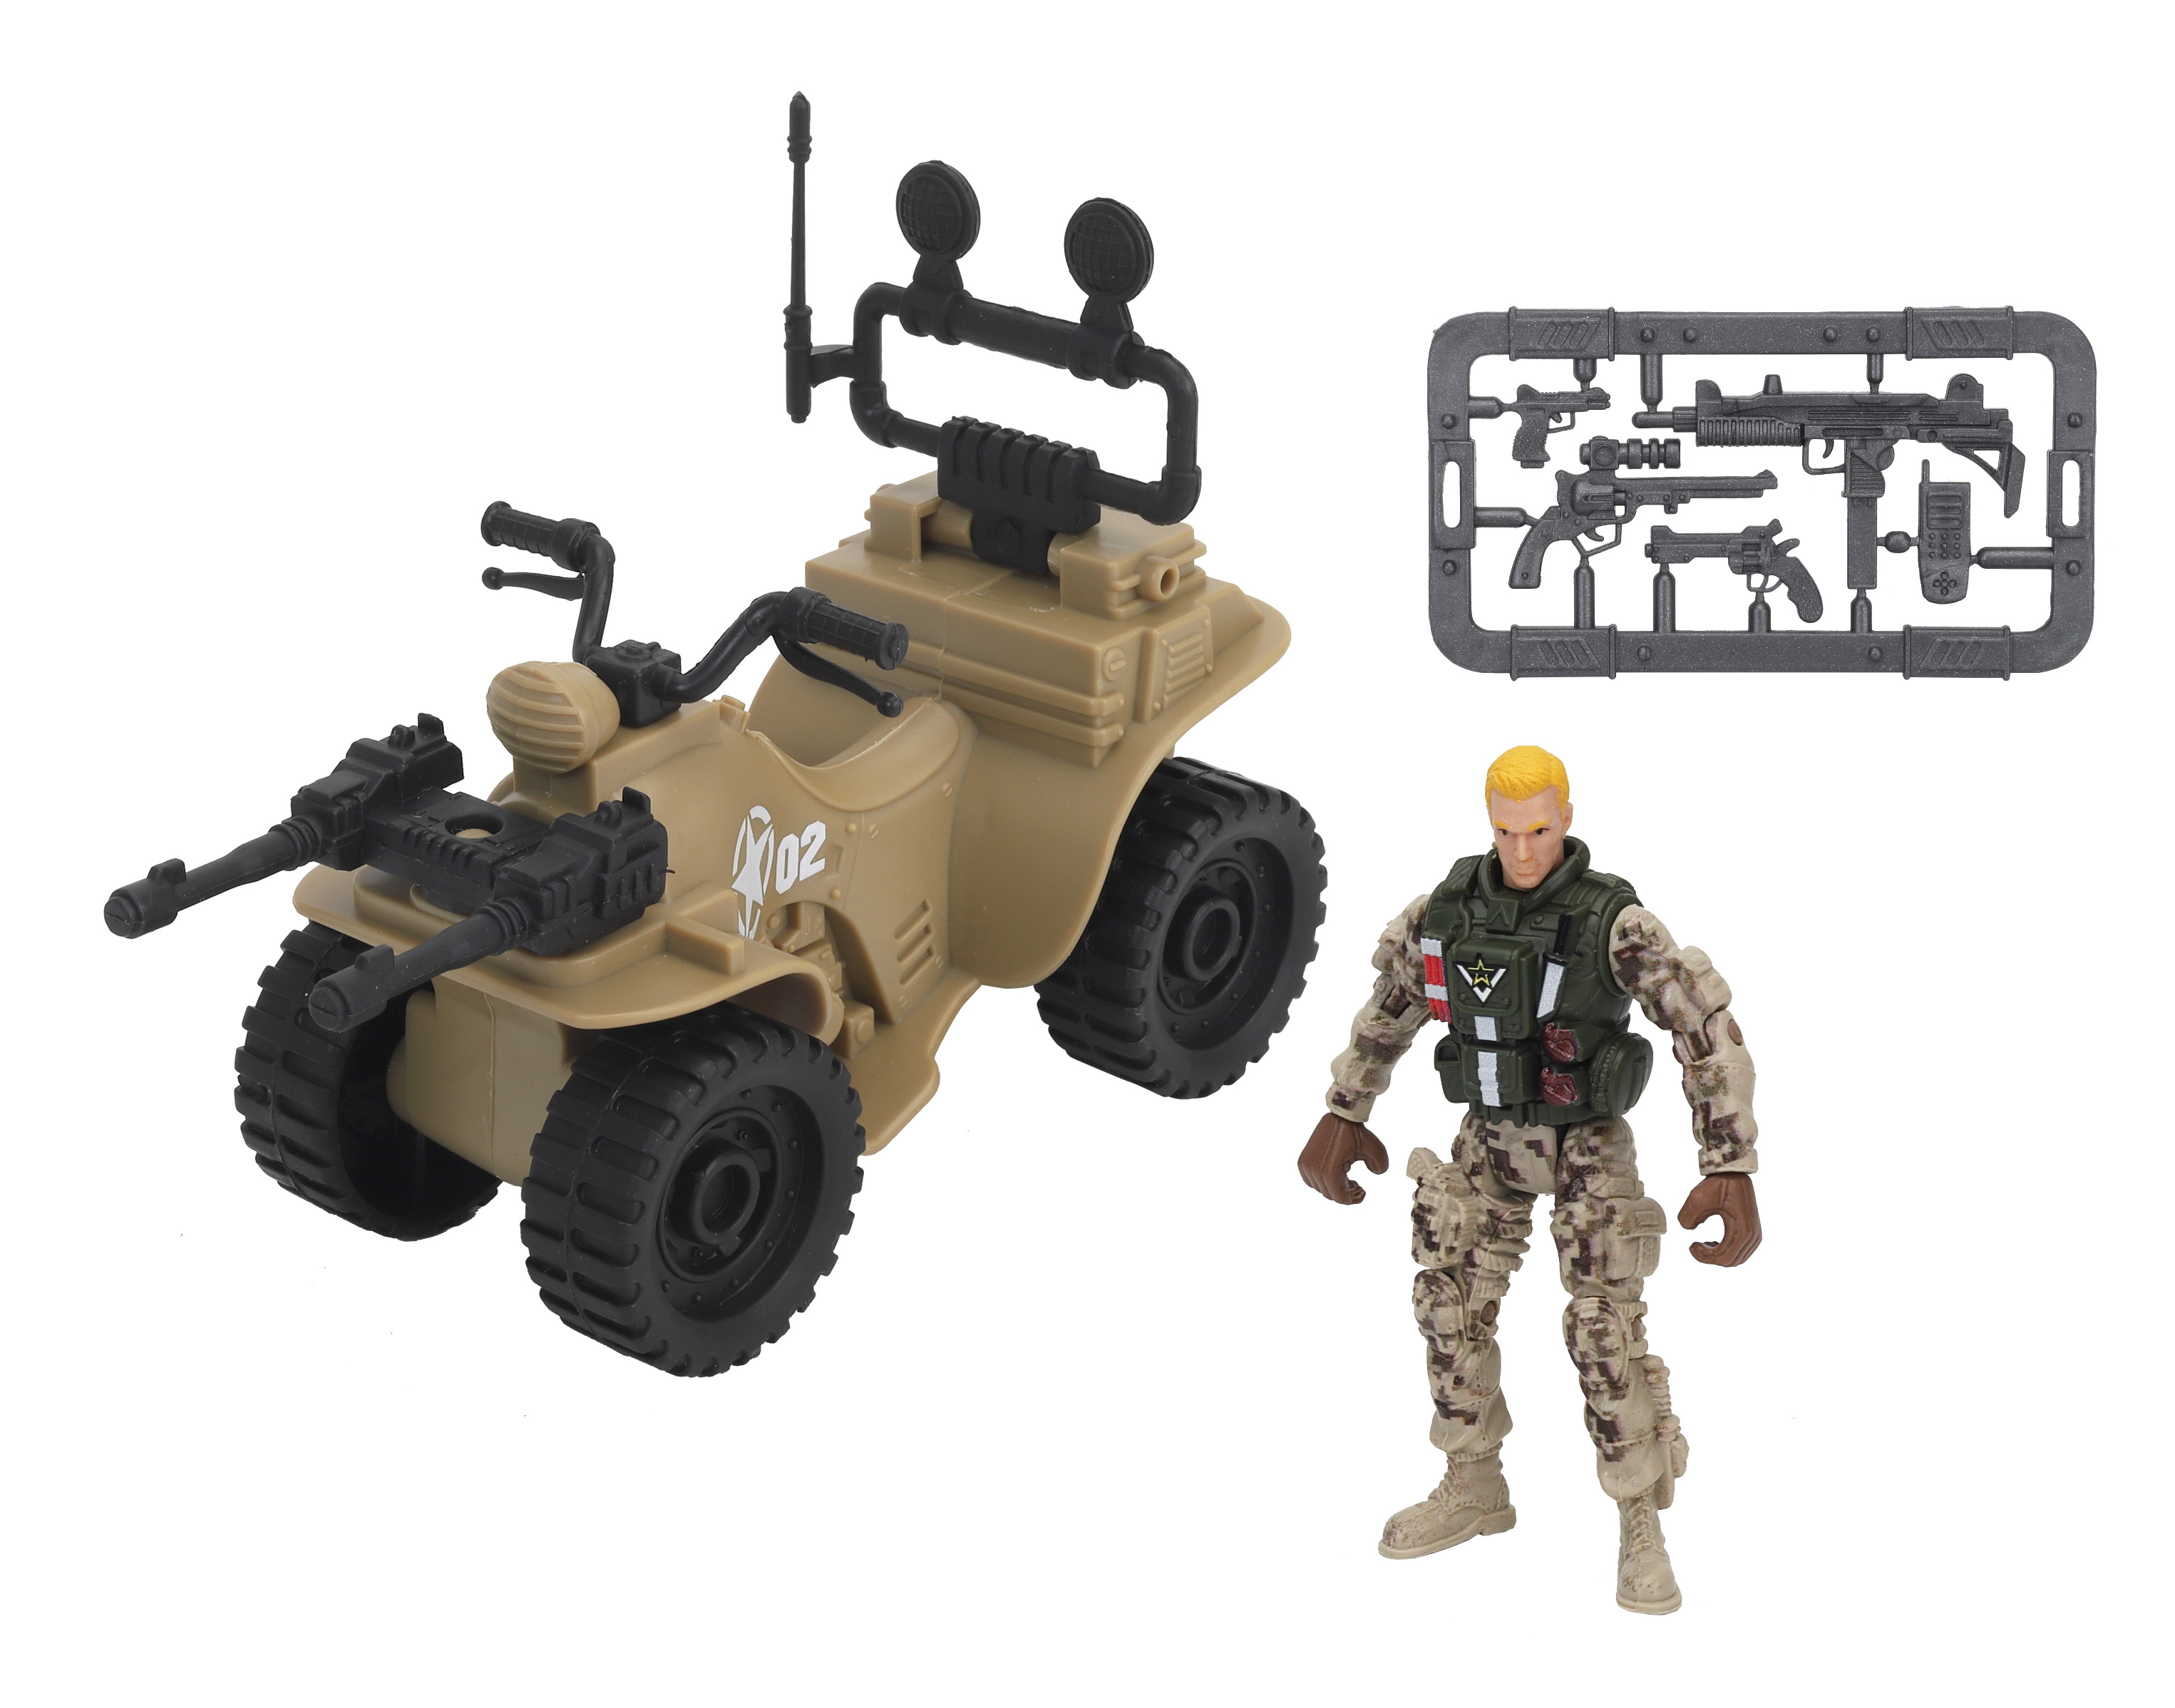 Soldier Force - Stealth Vehicle Mission Playset